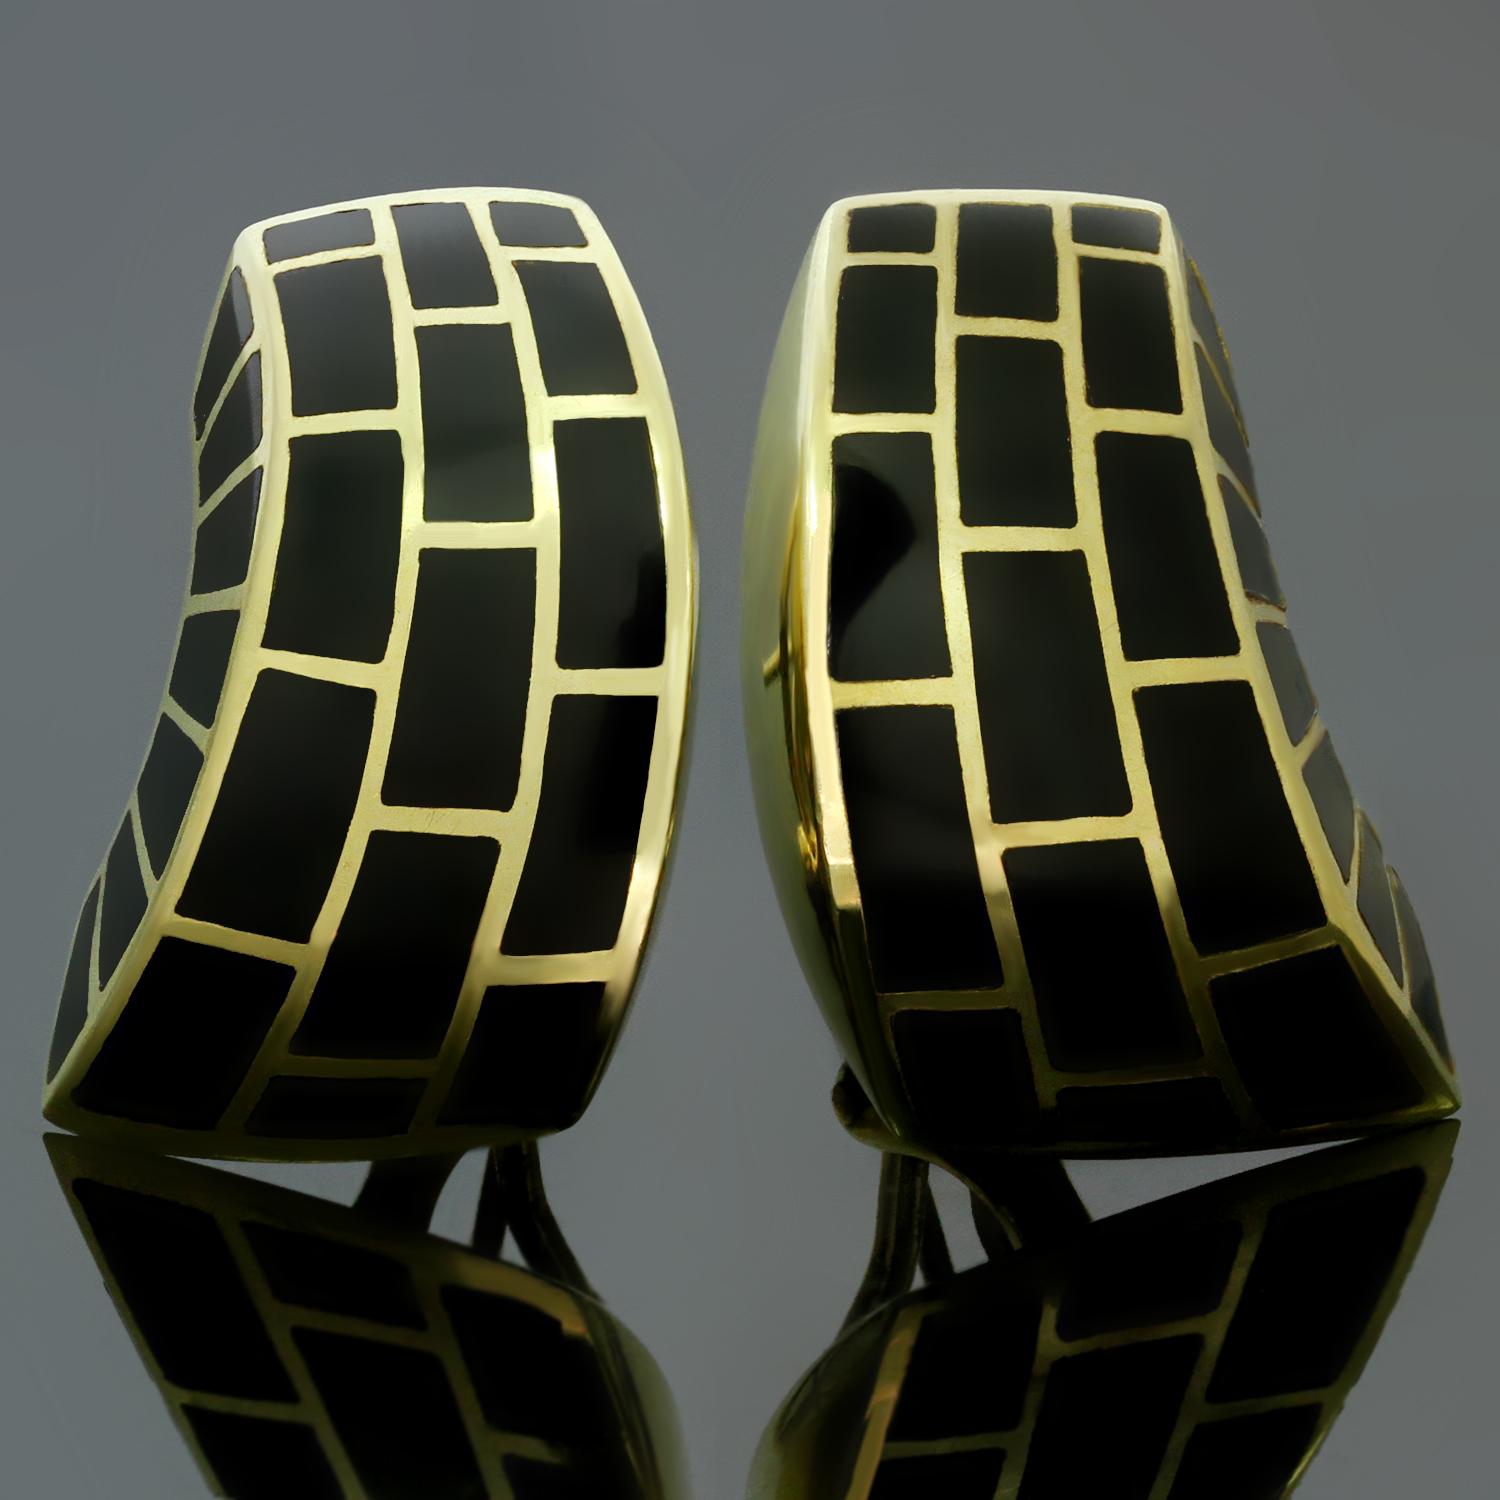 These gorgeous Angela Cummings lever-back earrings feature a chic geometric pattern crafted in 18k yellow gold and inlaid with black onyx. Made in United States circa 1990s. Measurements: 0.66